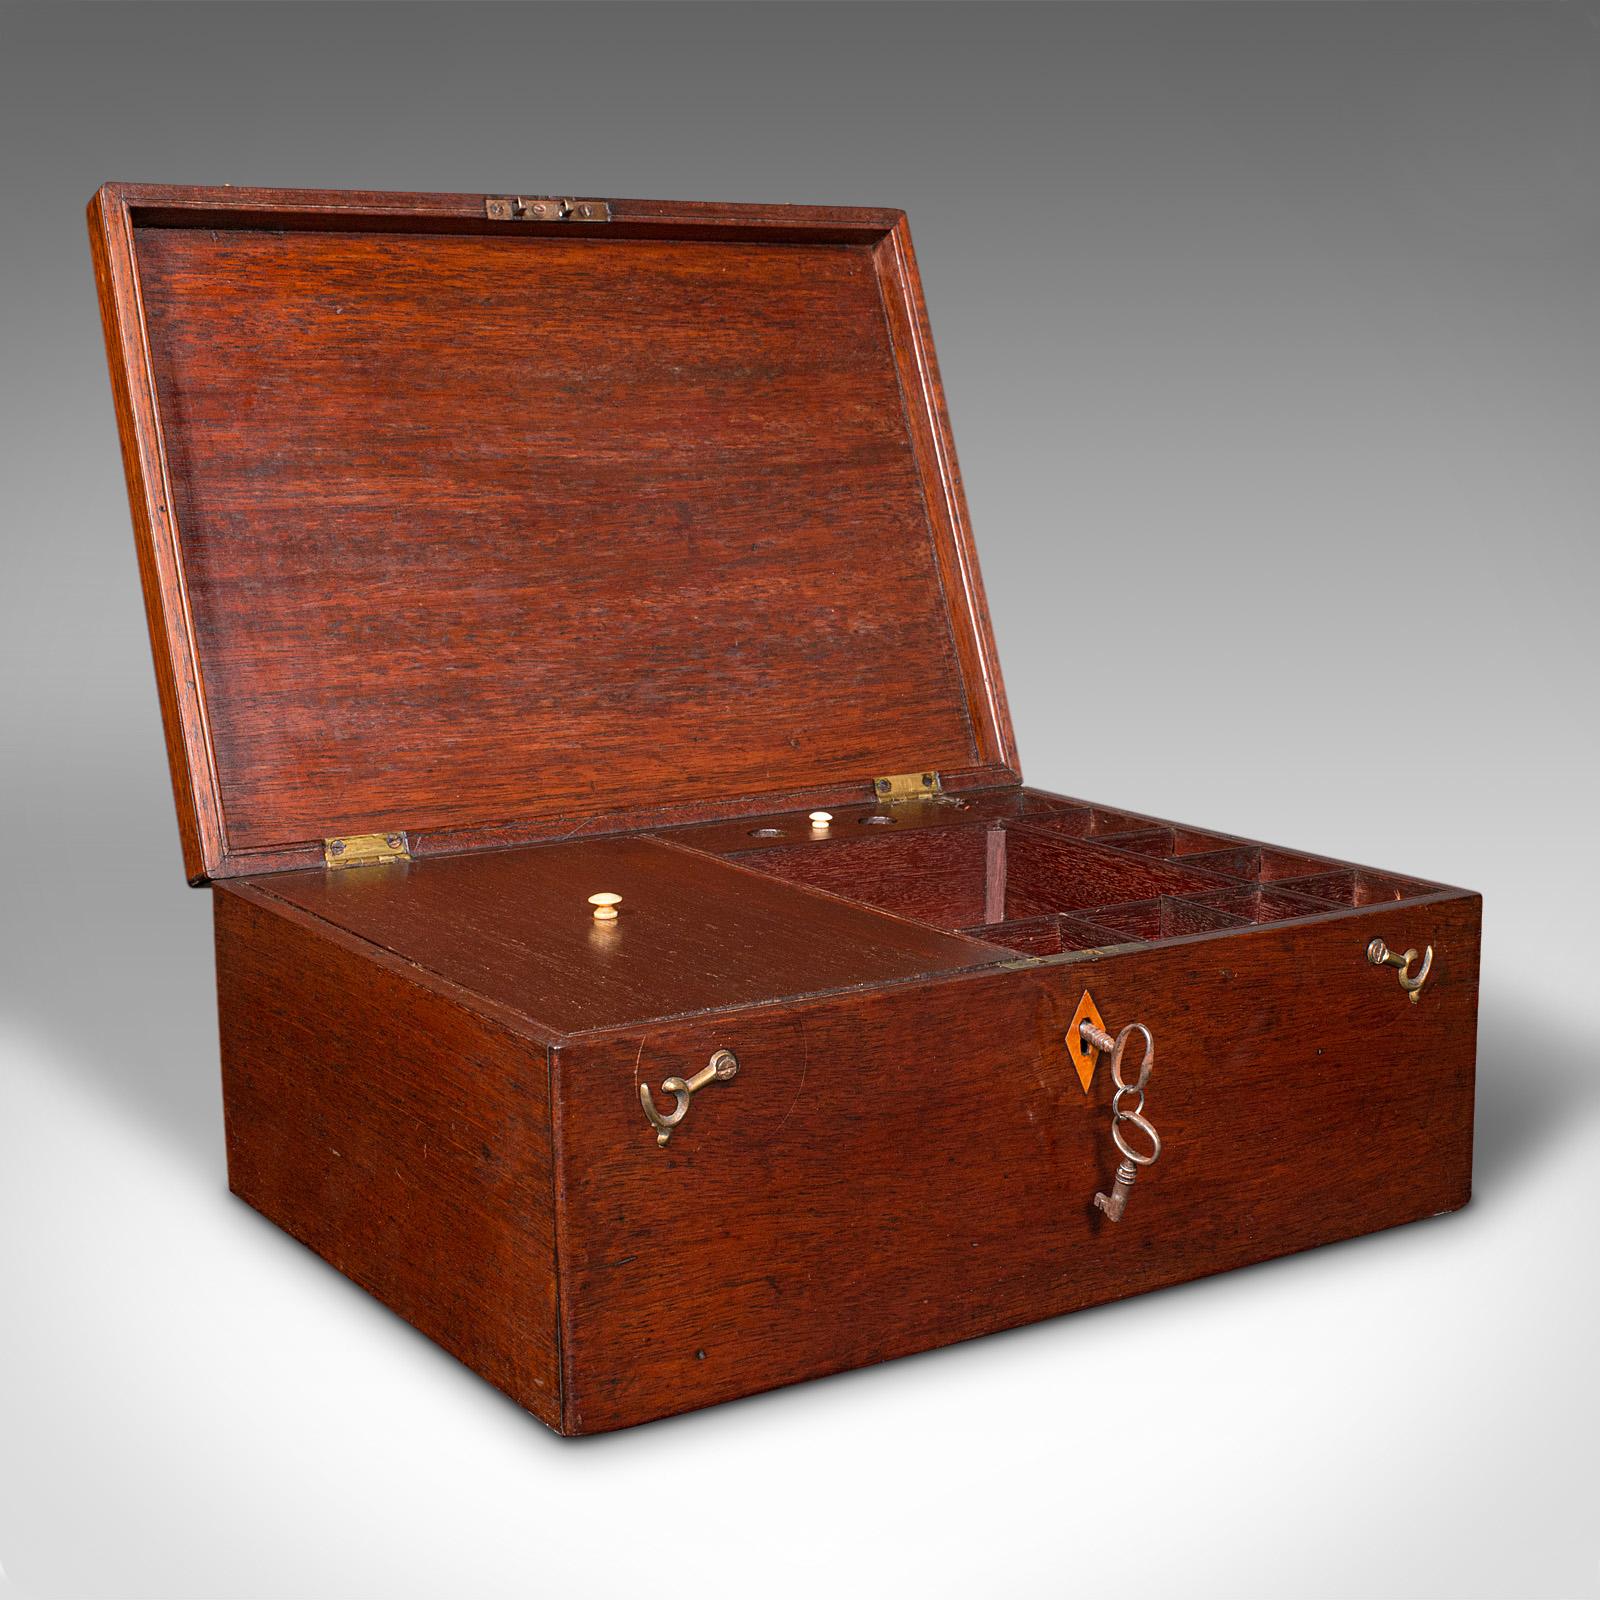 This is an antique travelling jewellery salesman's box. An English, mahogany and cedar secure carry case, dating to the early Victorian period, circa 1850.

Delightfully appointed traveller's box with useful storage
Displays a desirable aged